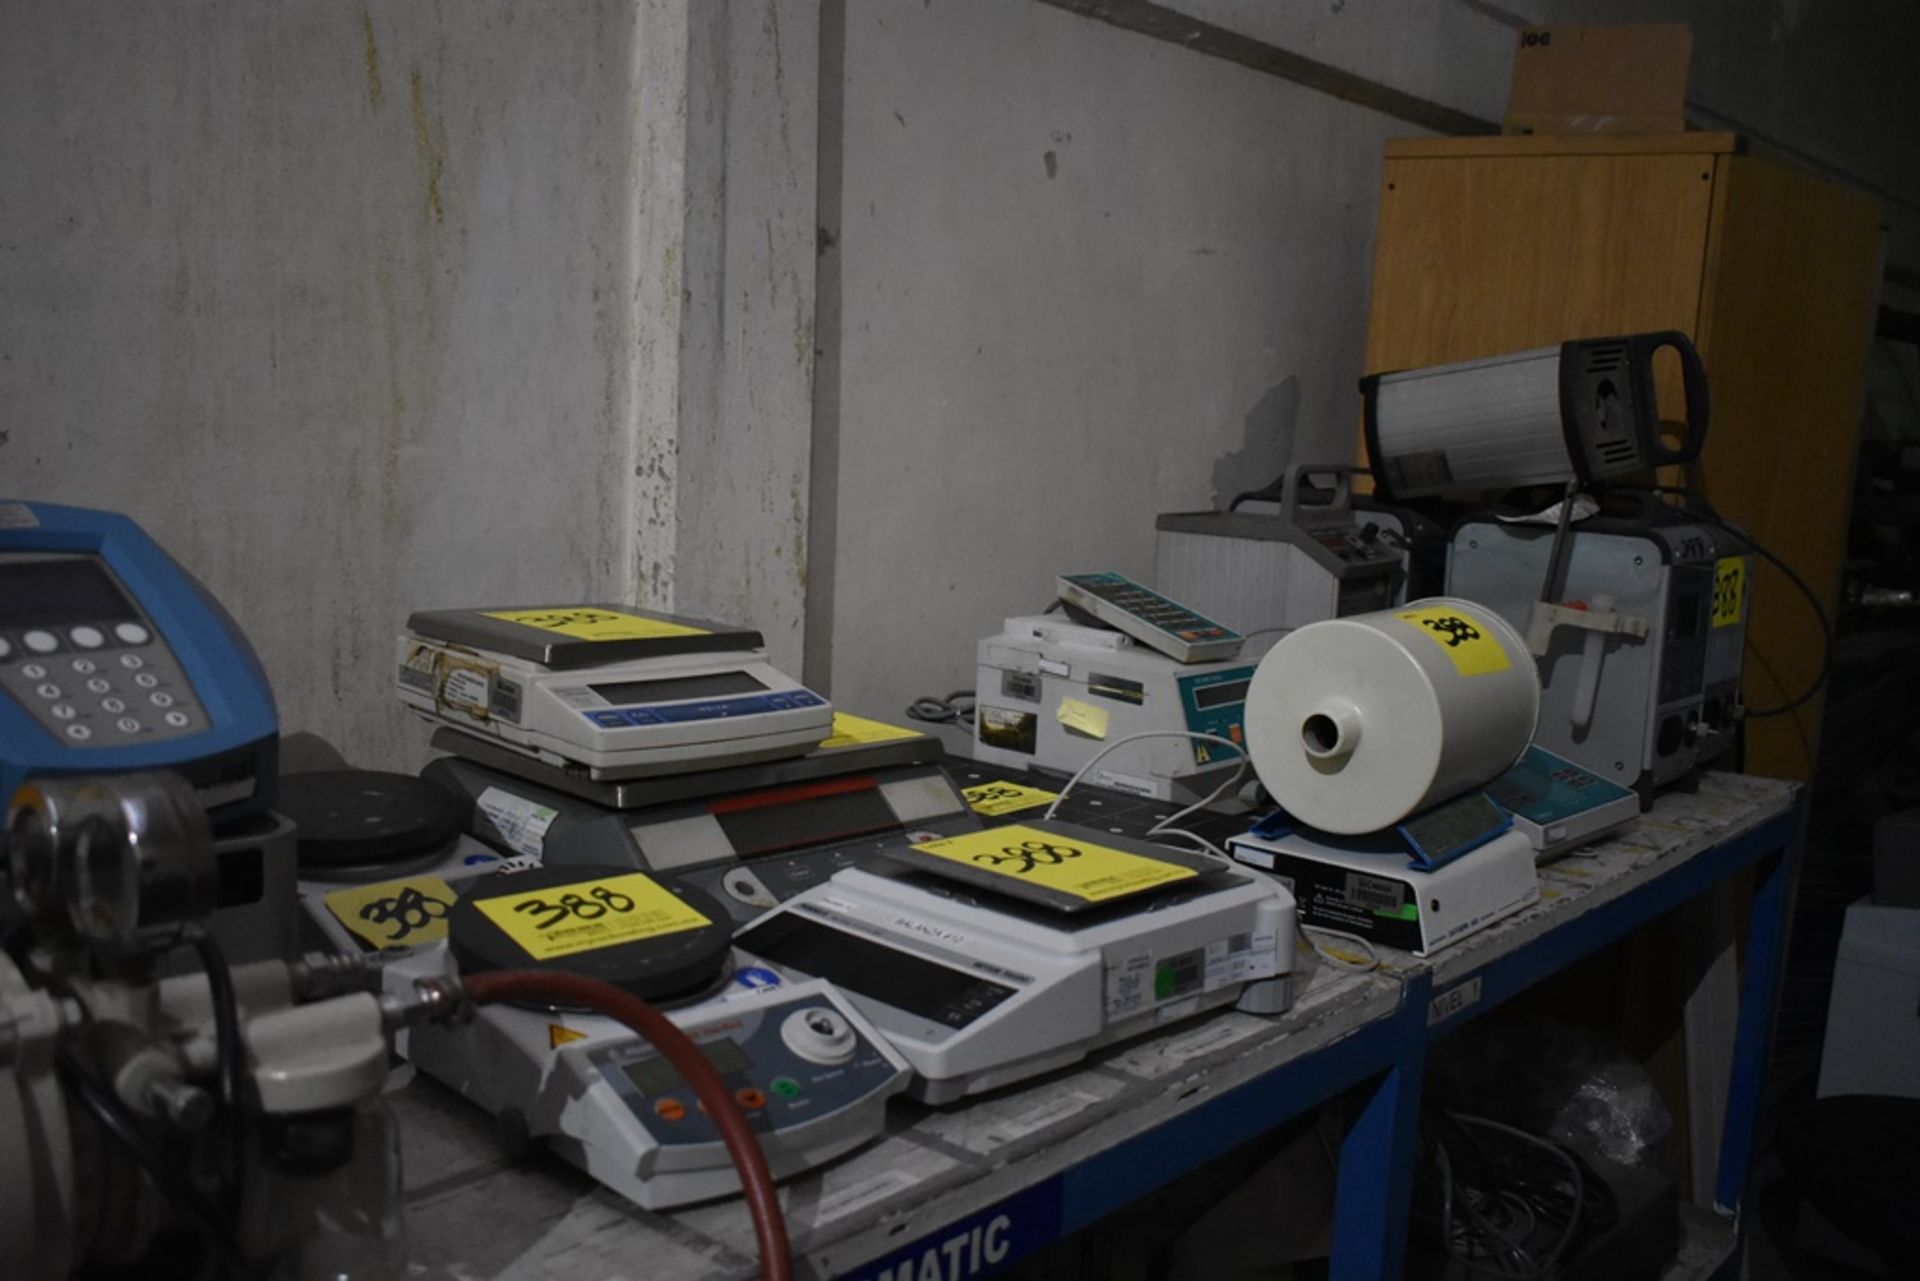 5 Oxygen analyzers and miscellaneous merchandise - Image 11 of 52